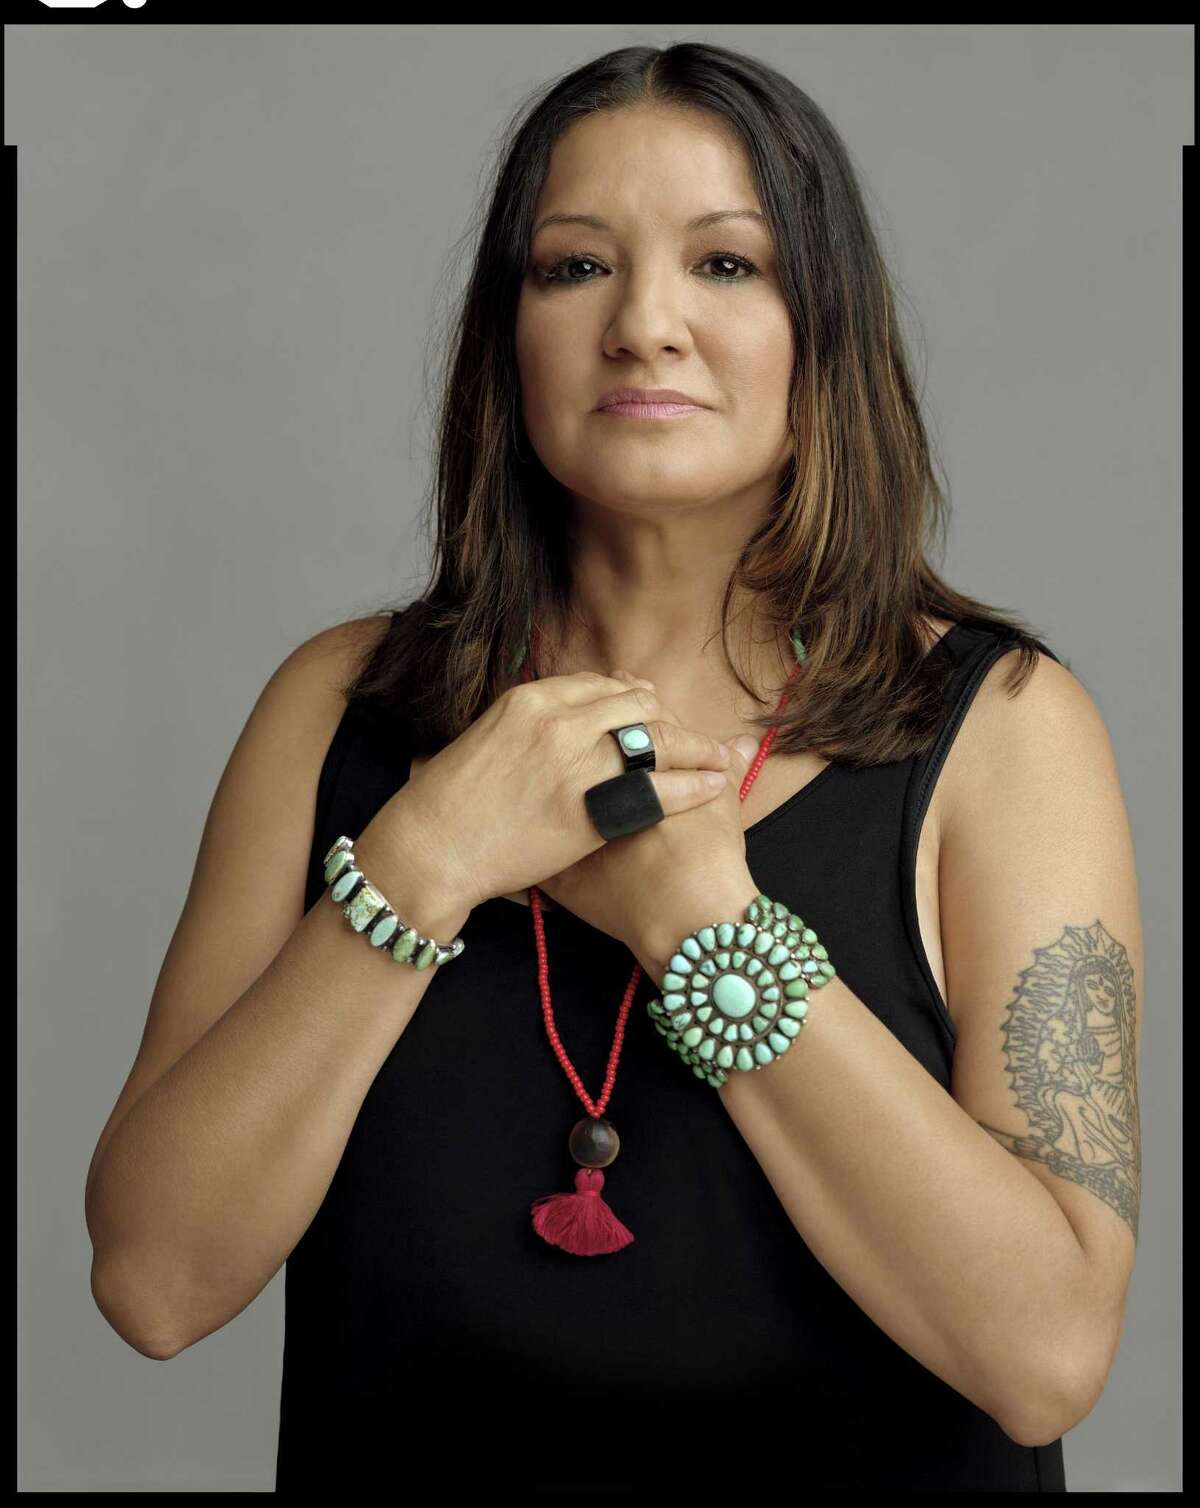 A portrait of author Sandra Cisneros is one of the images in photographer Timothy Greenfield-Sanders' "Latino List" series.